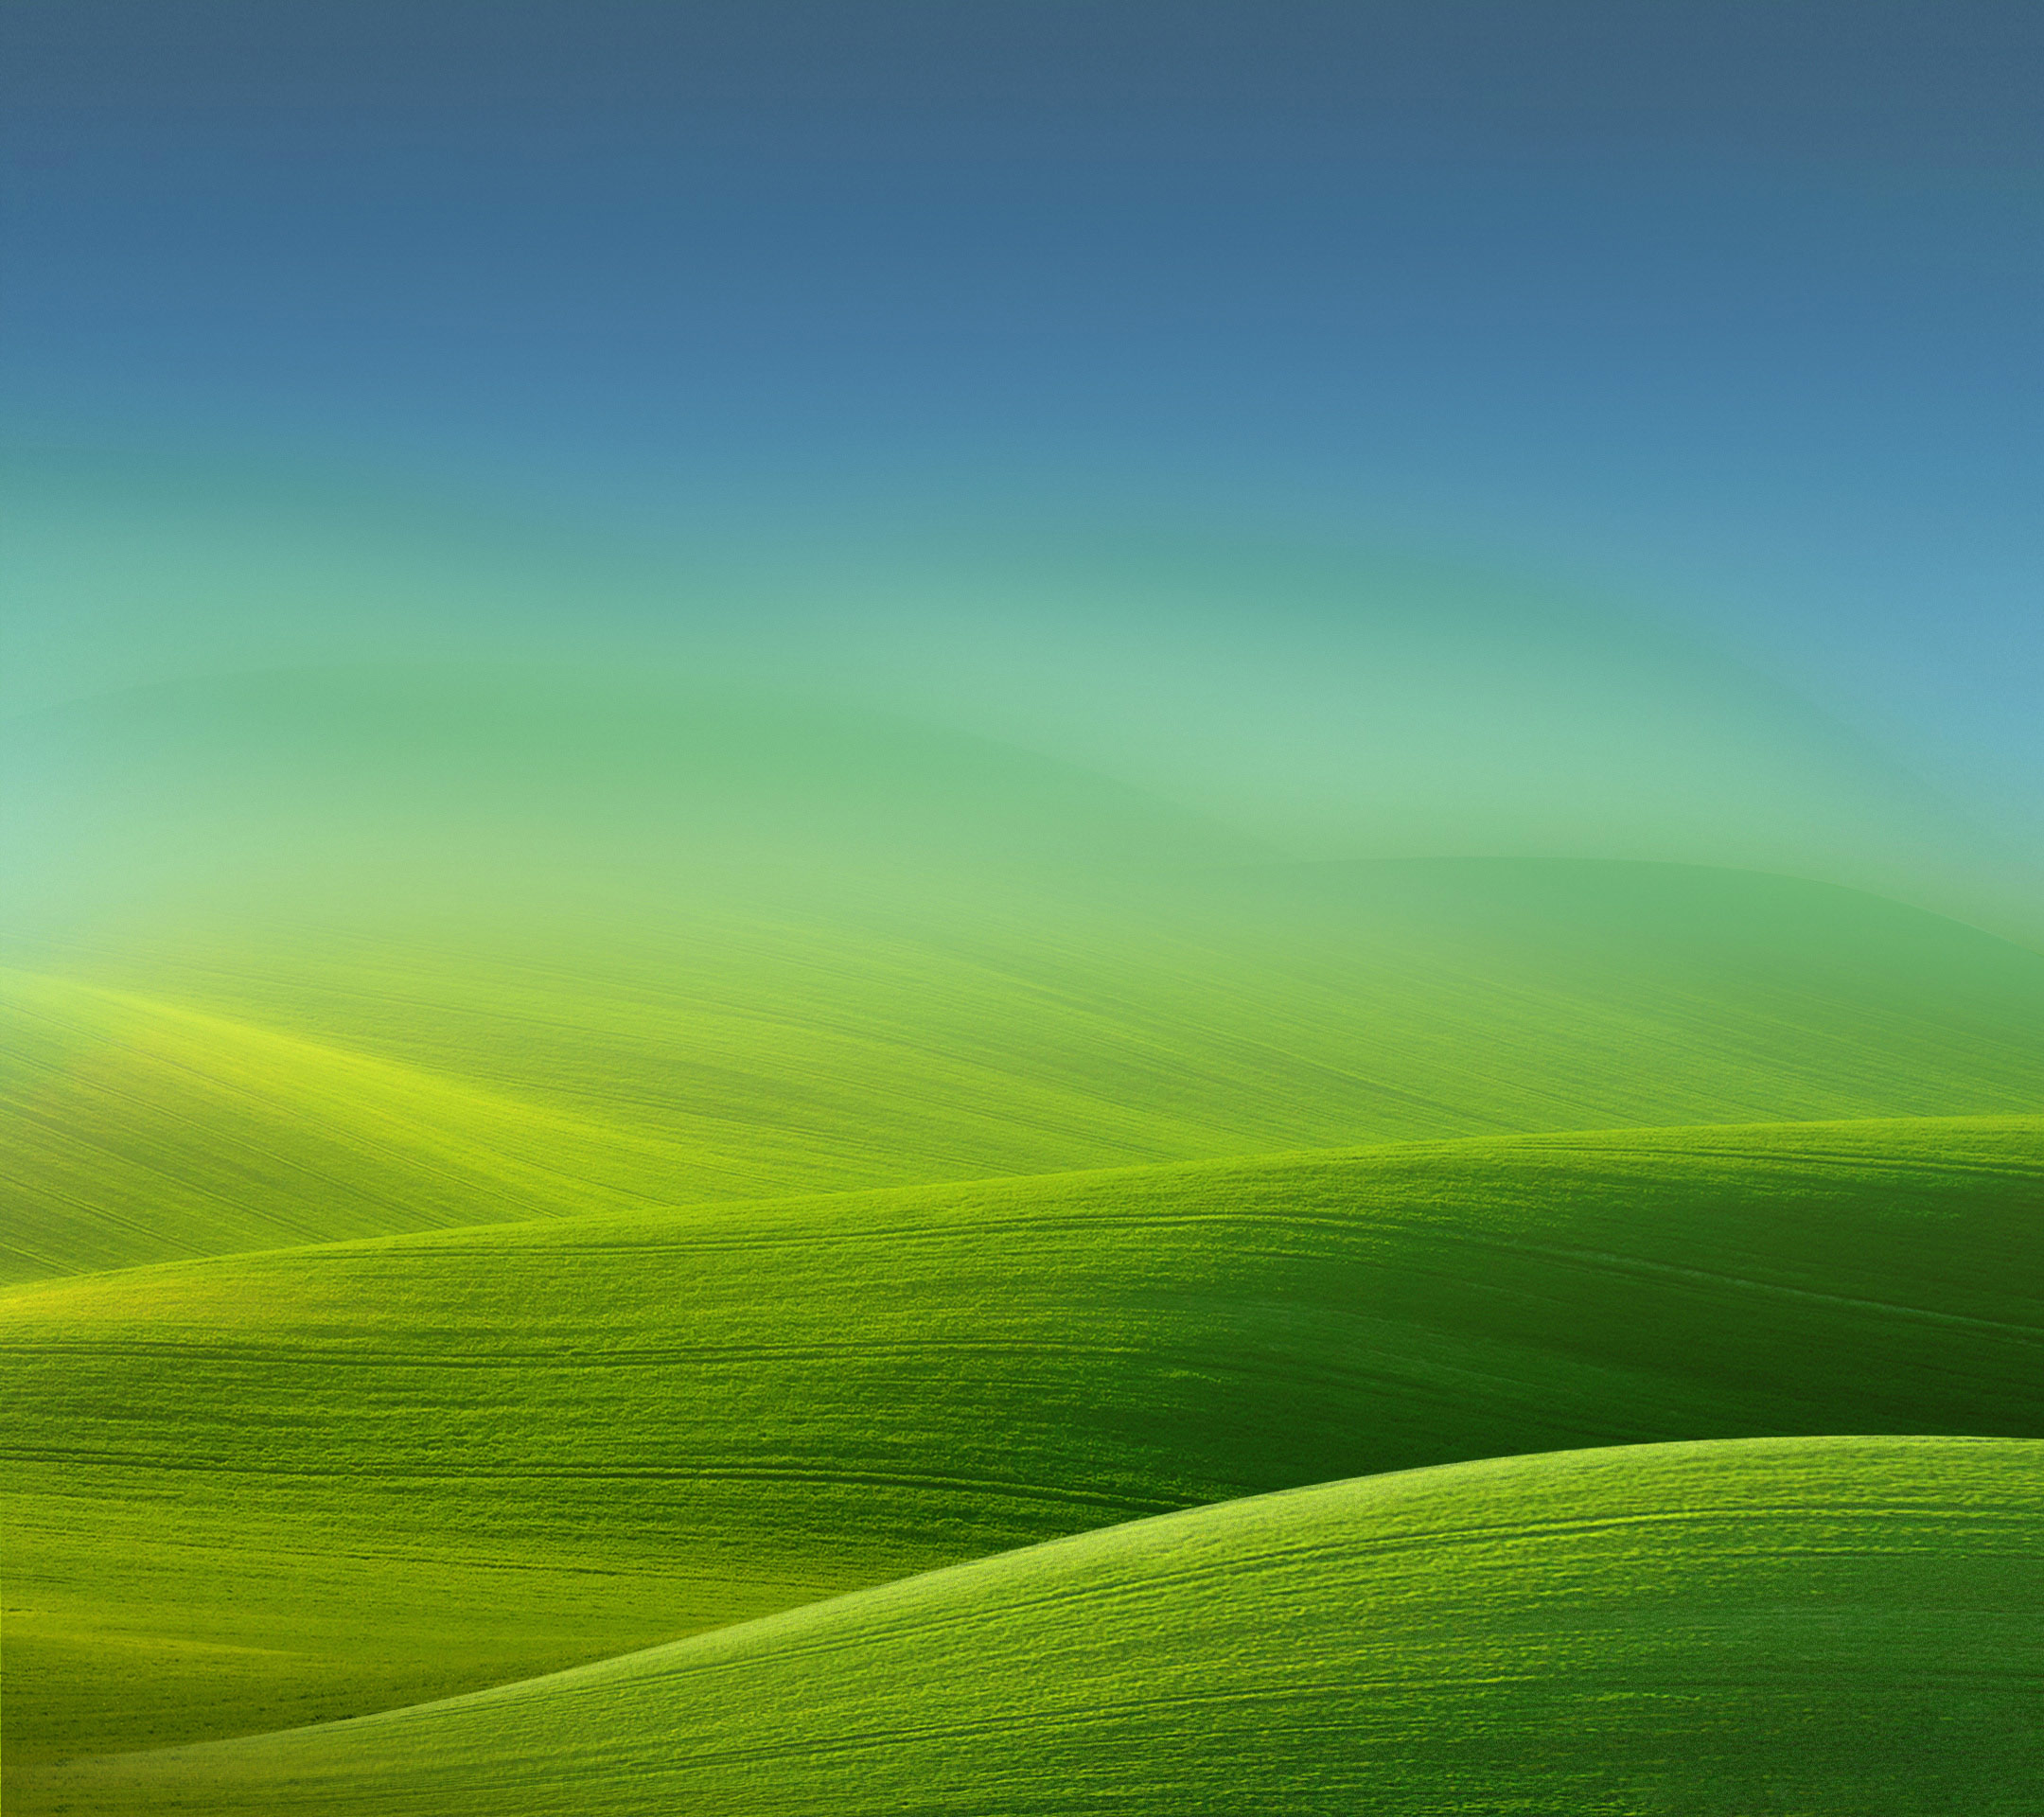 Download 10+ MIUI V6 Official Stock HD Wallpapers